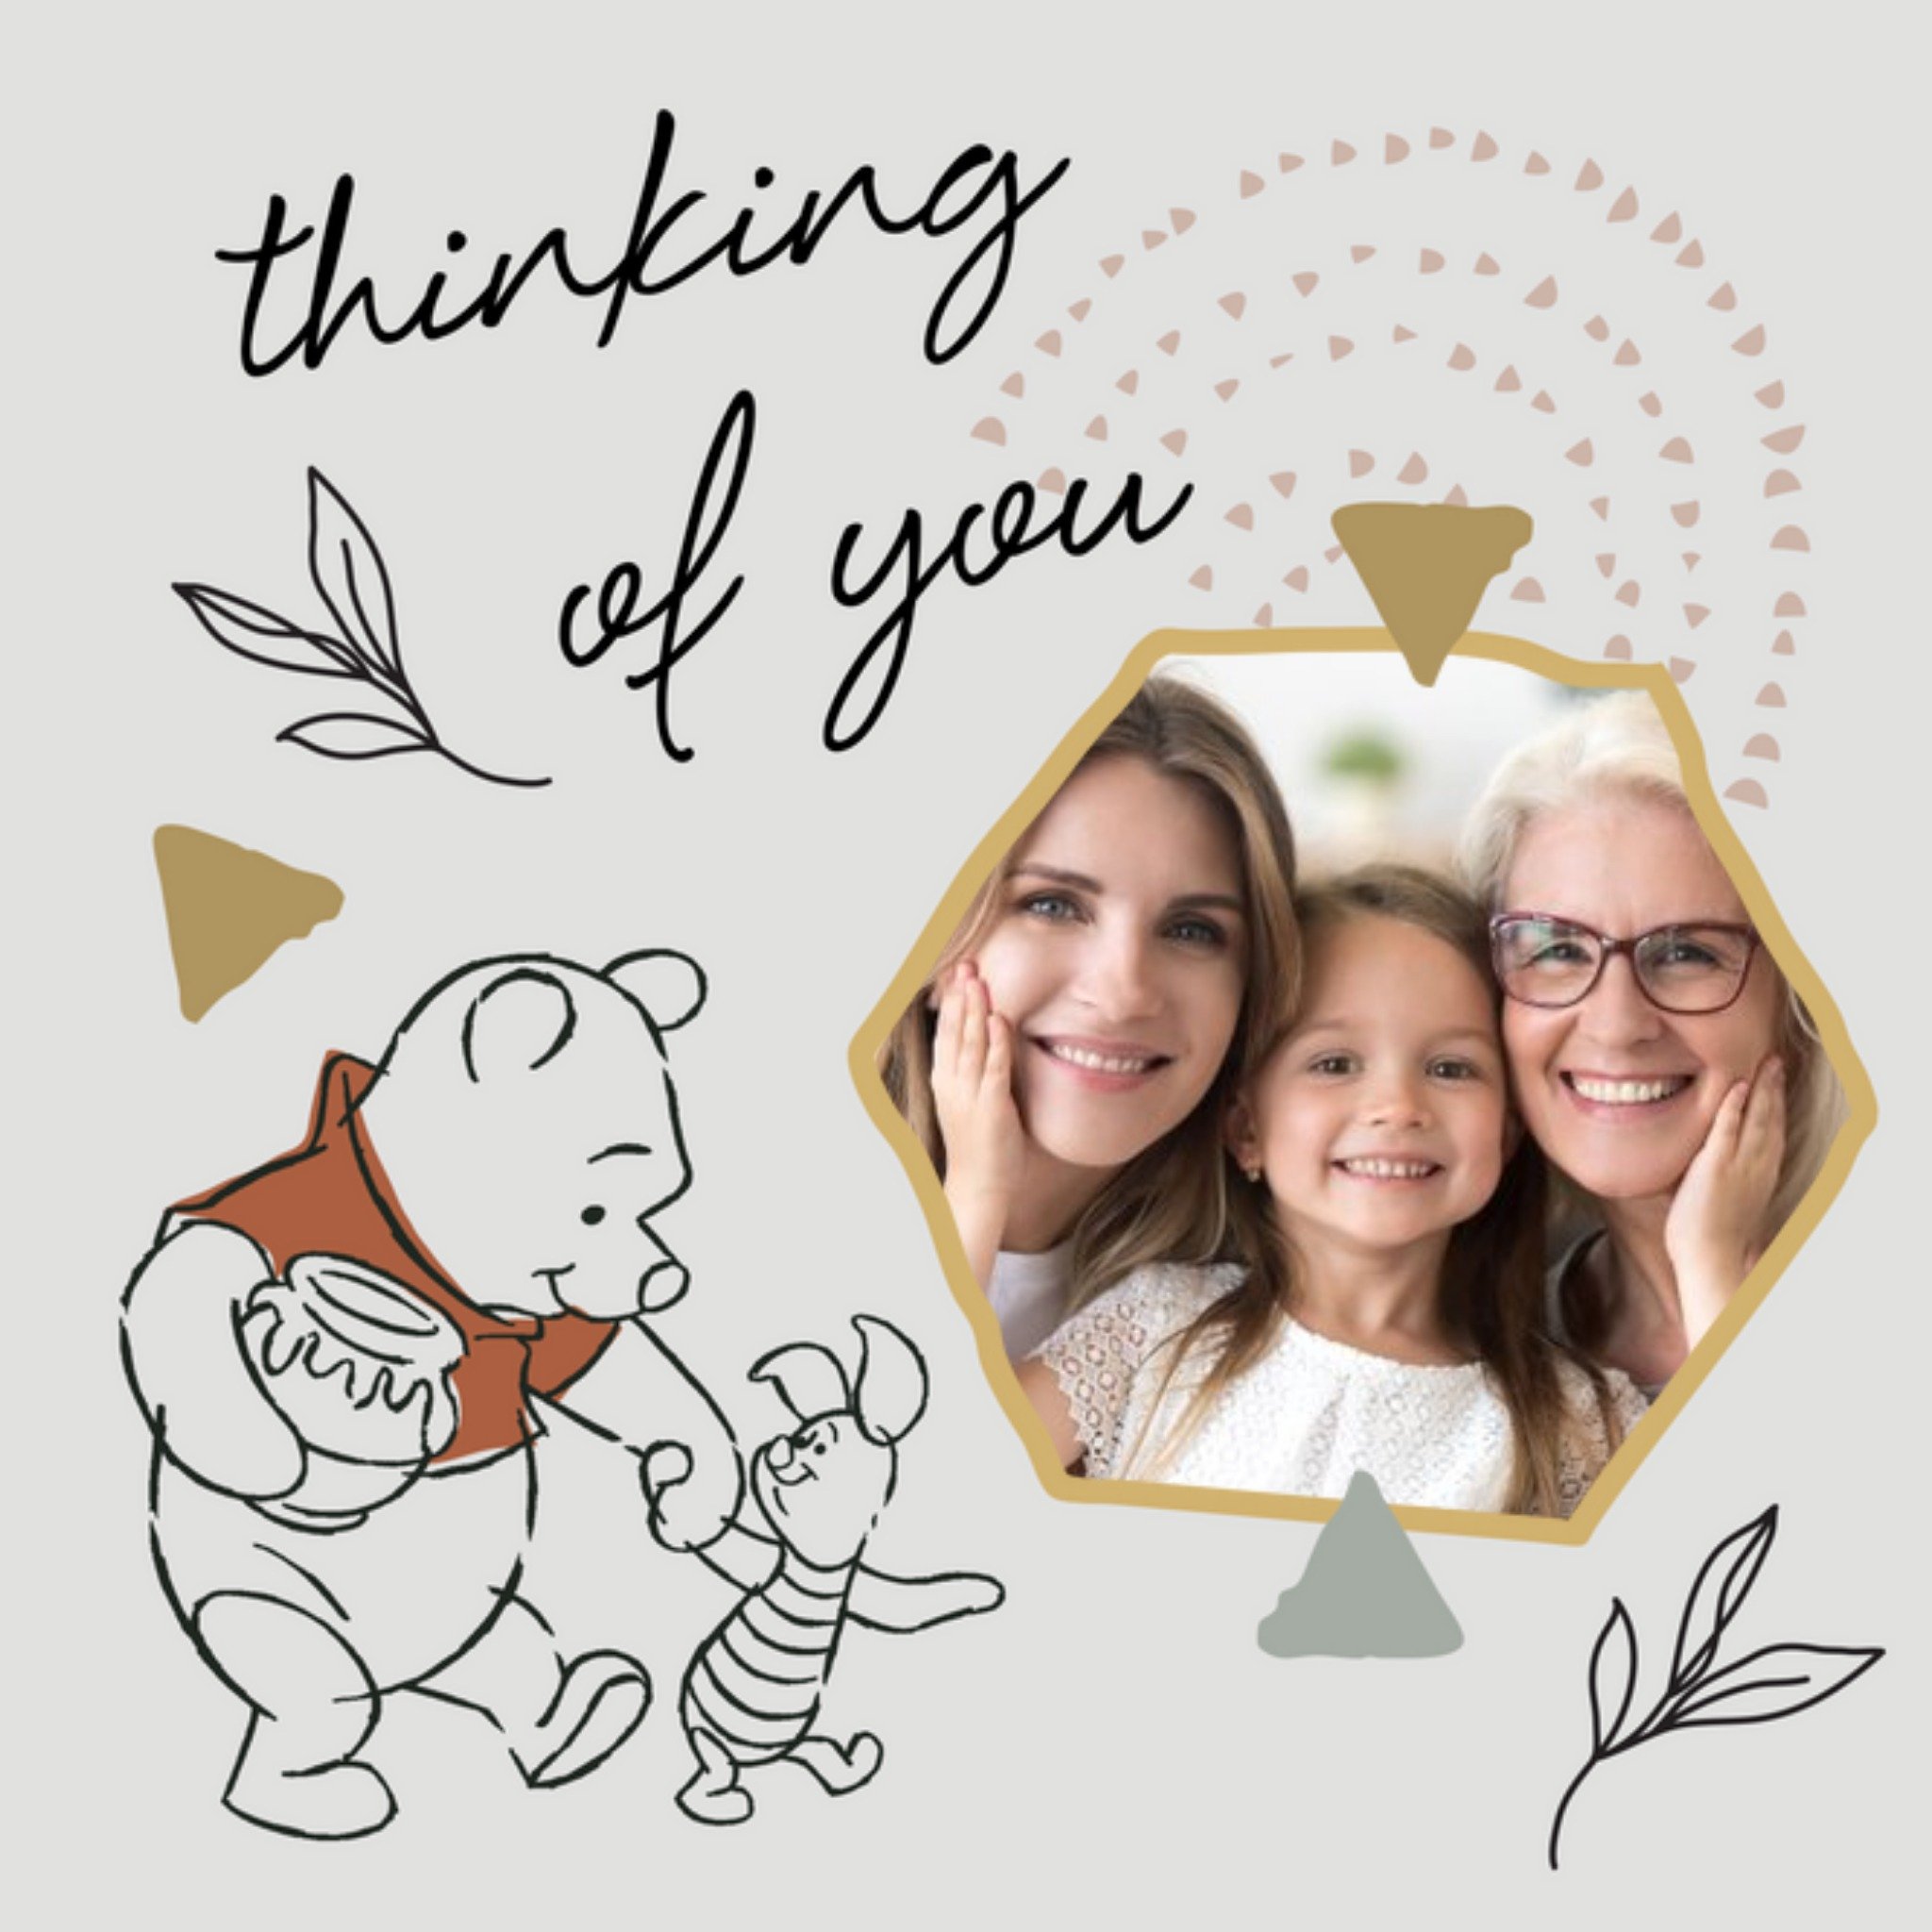 Winnie The Pooh And Piglet Illustration Thinking Of You Photo Upload Card, Square